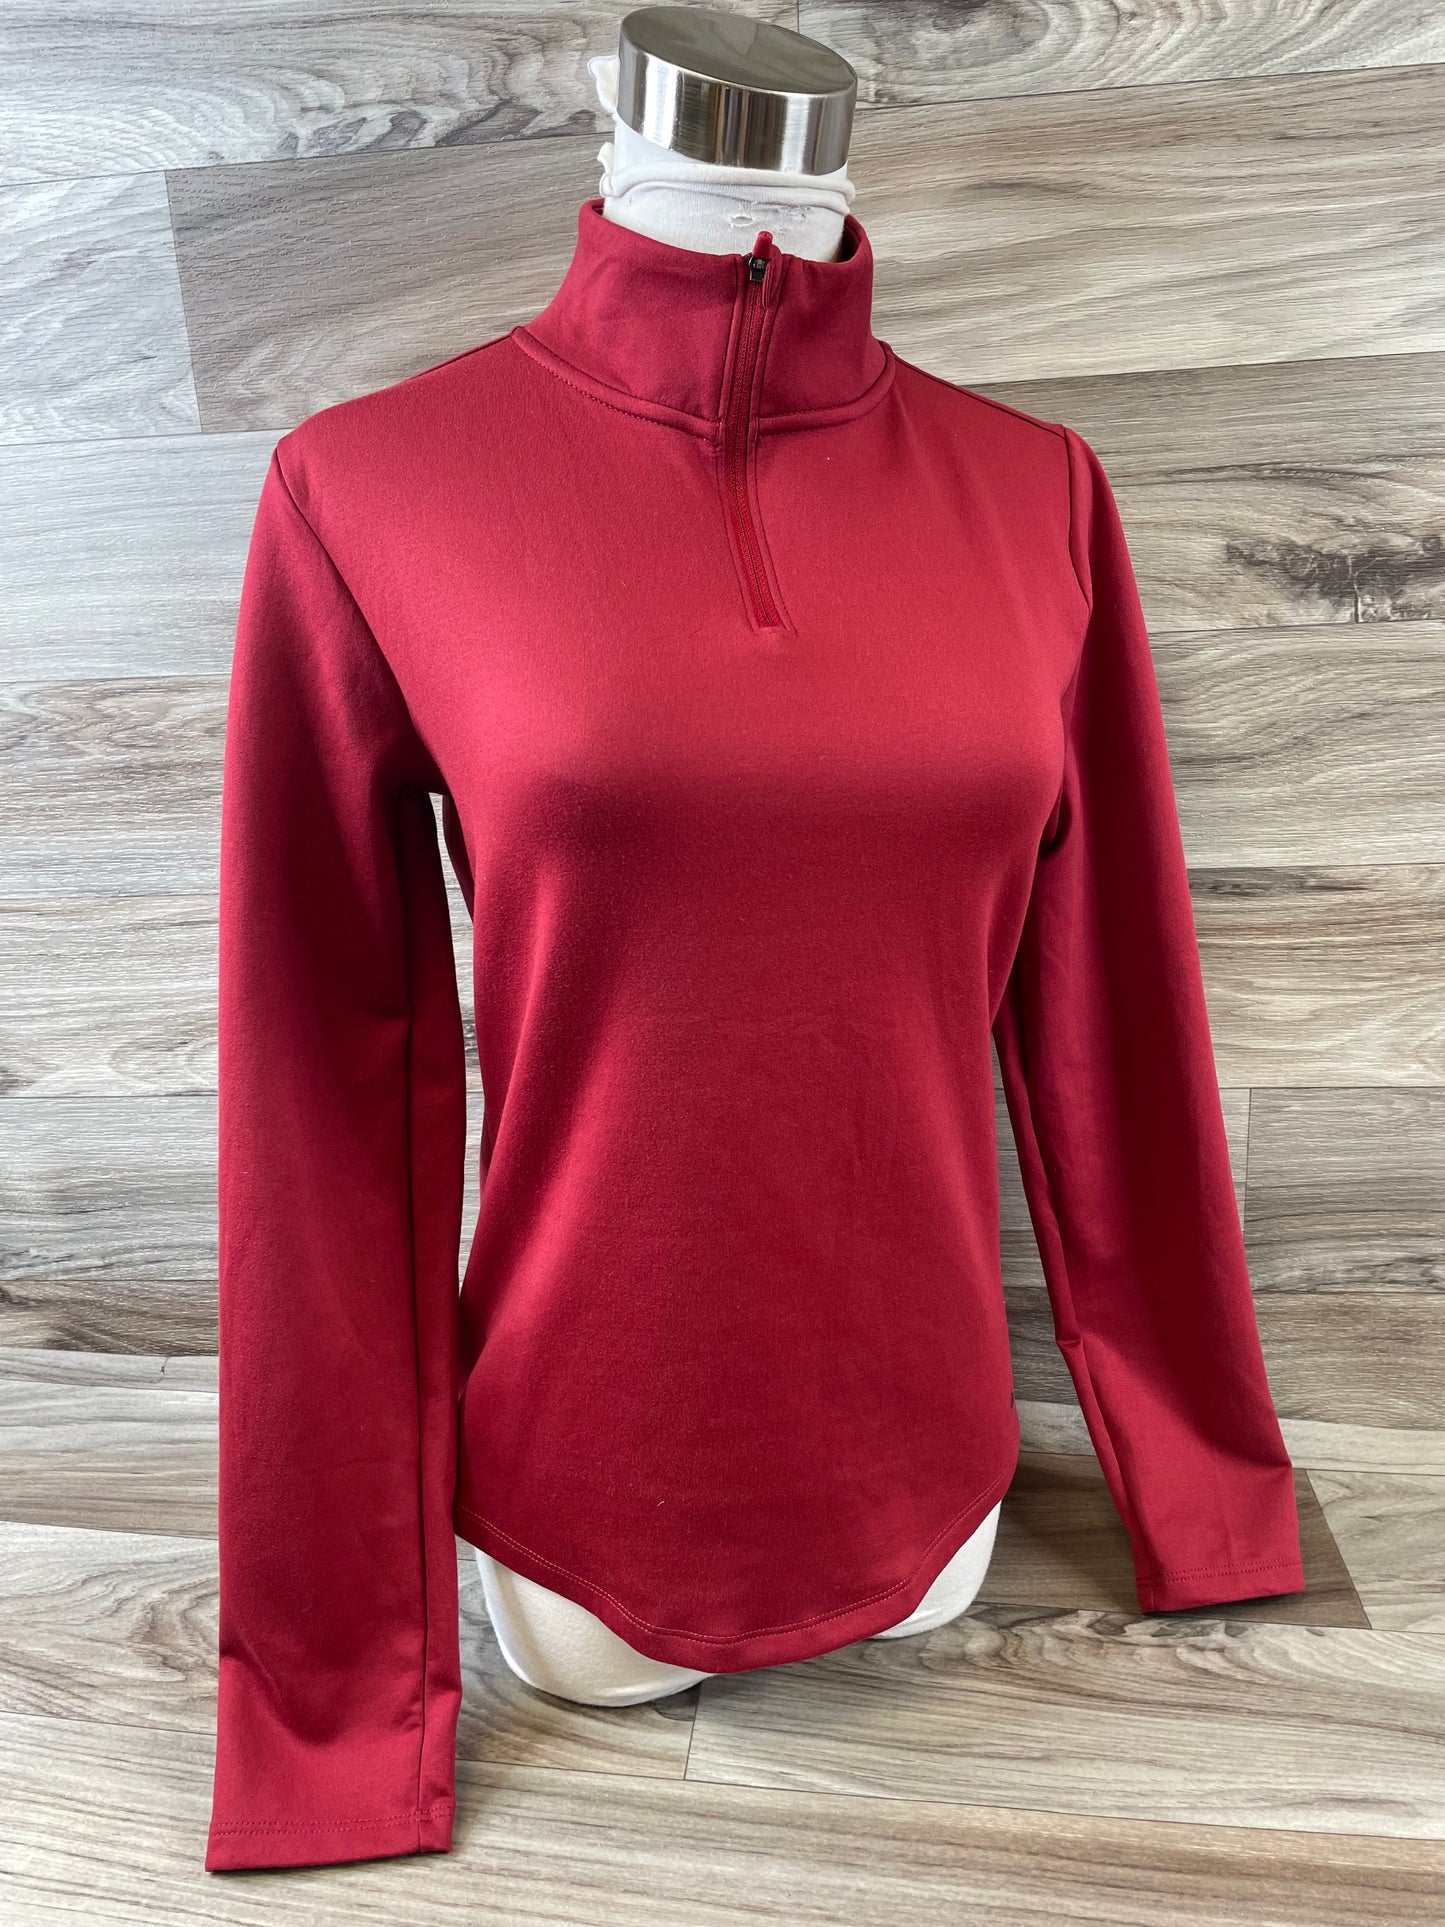 Red Athletic Top Long Sleeve Collar Nike Apparel, Size Xs